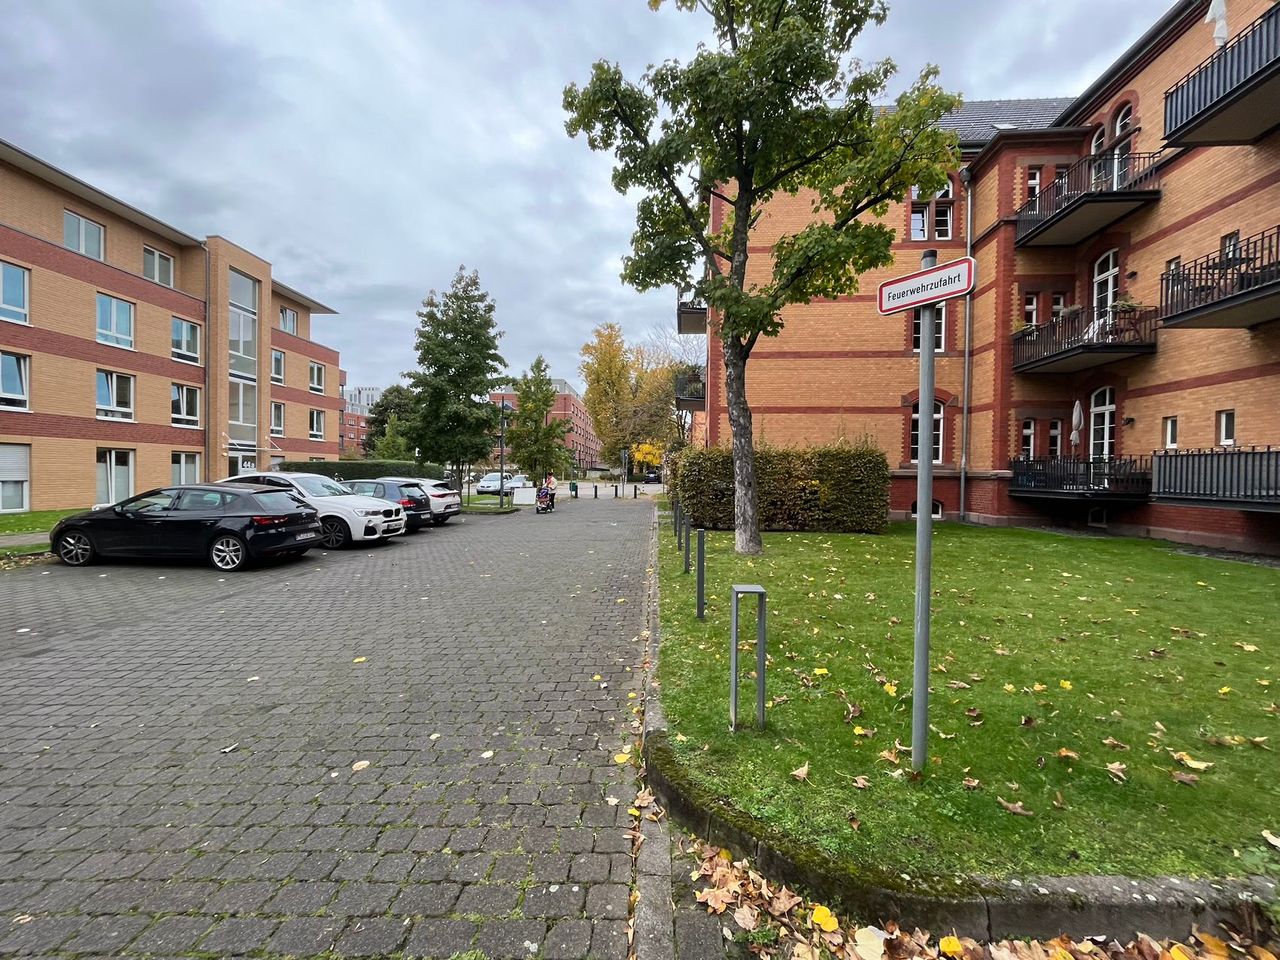 New furnished 1 bedroom apartment in the heart of Düsseldorf